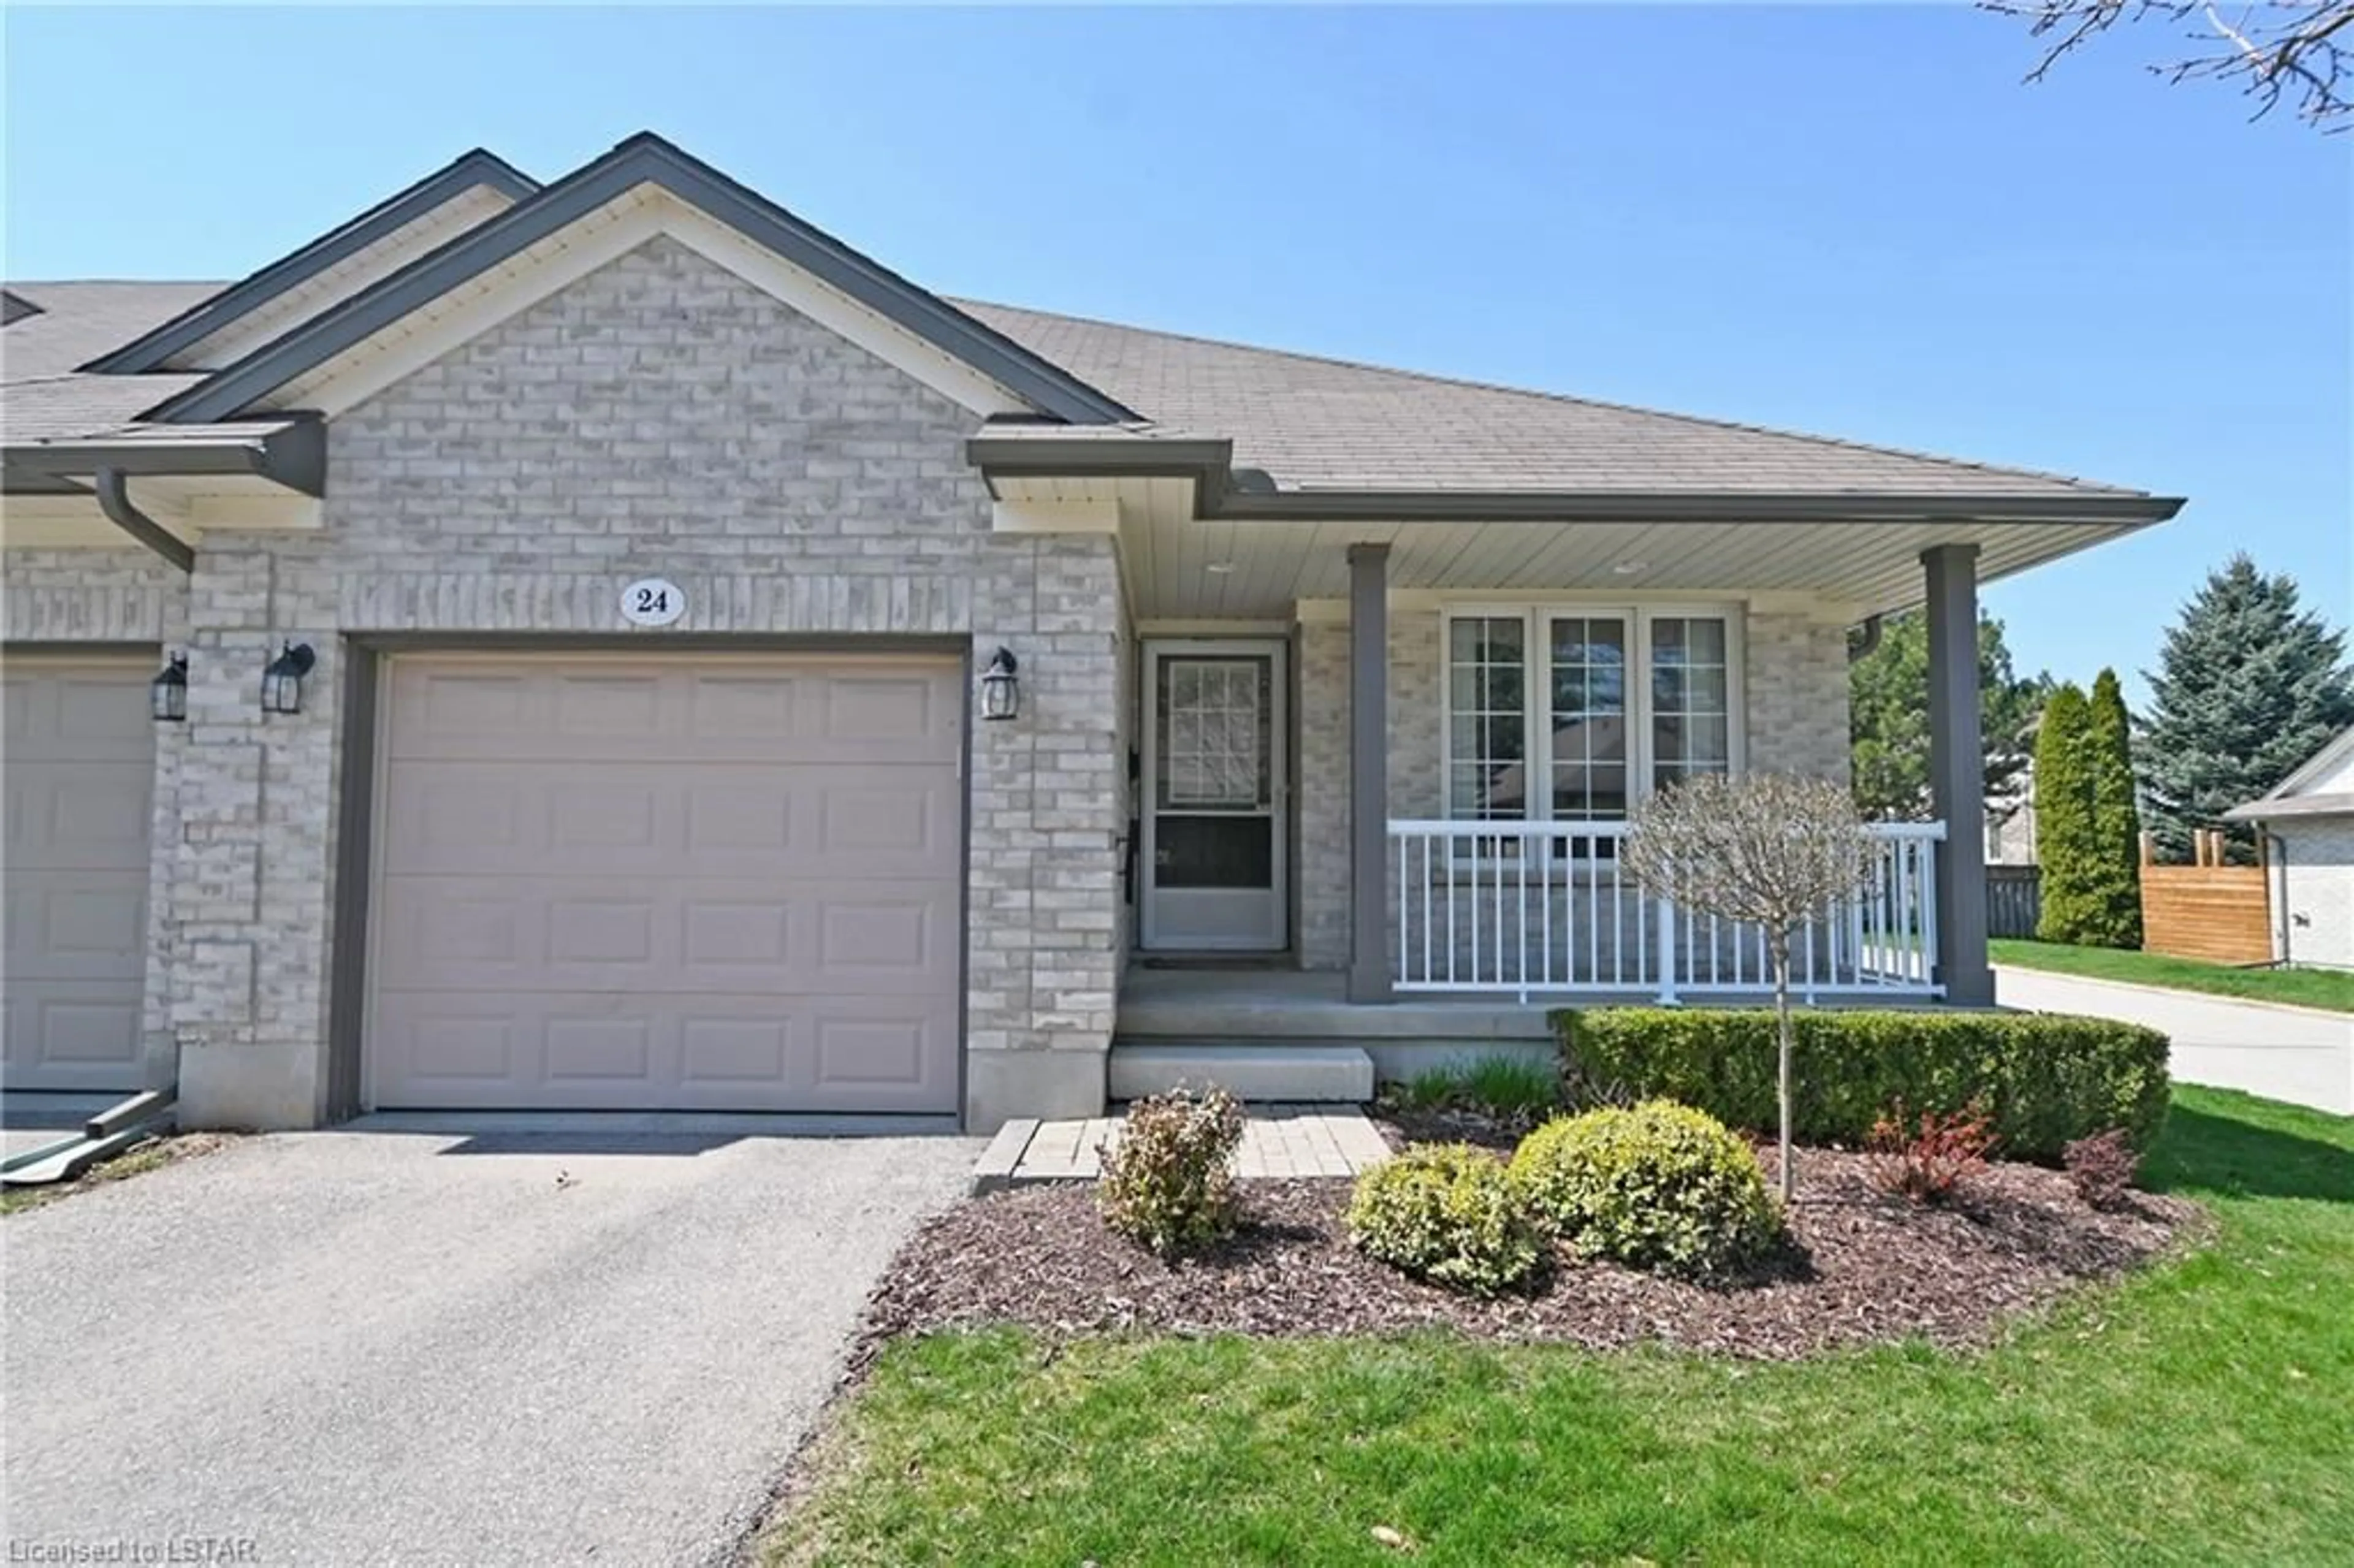 Home with brick exterior material for 20 Windemere Pl #24, St. Thomas Ontario N5R 6H6